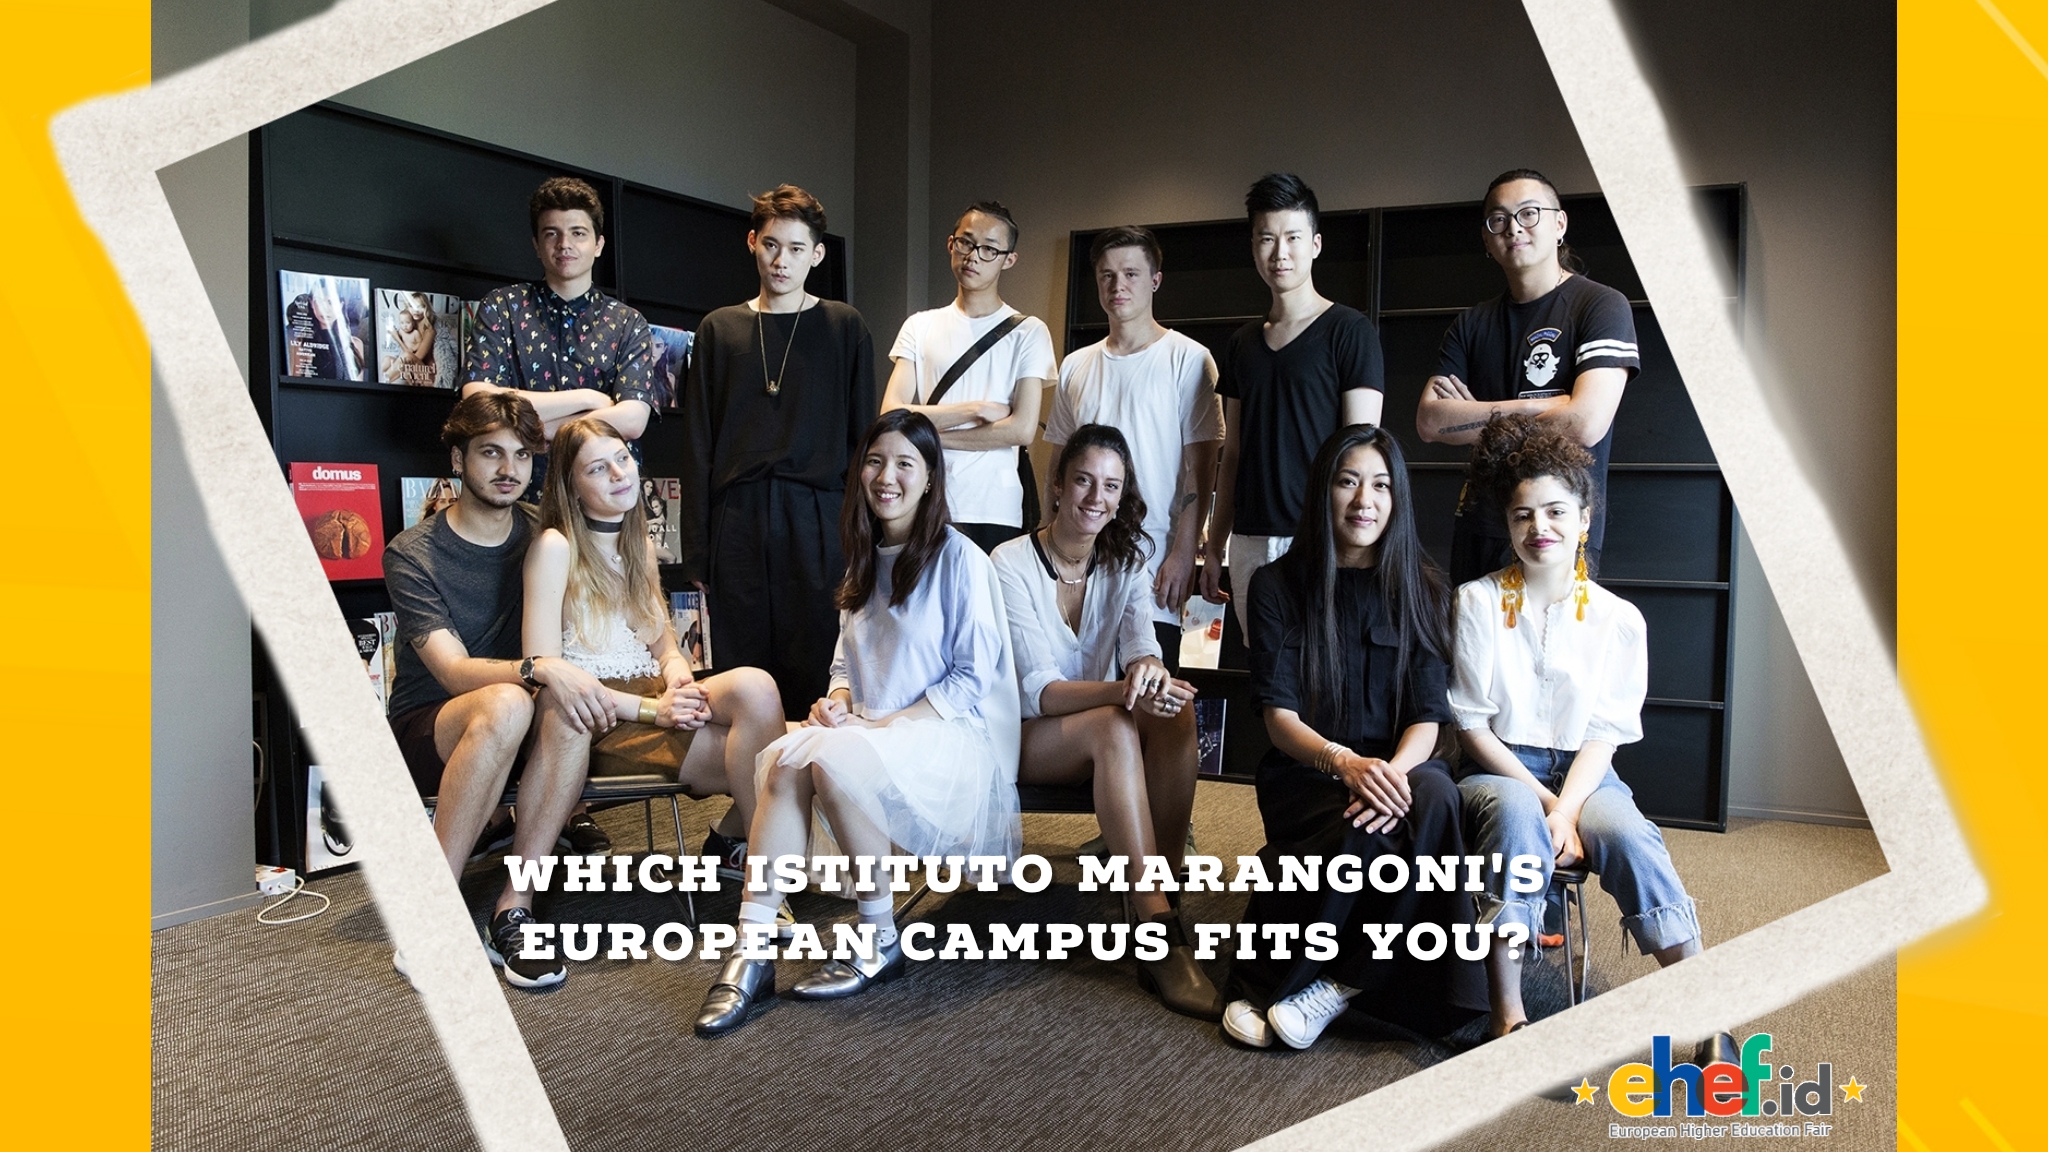 Milano, Firenze, Paris, London - Which Istituto Marangoni's campus fits you?